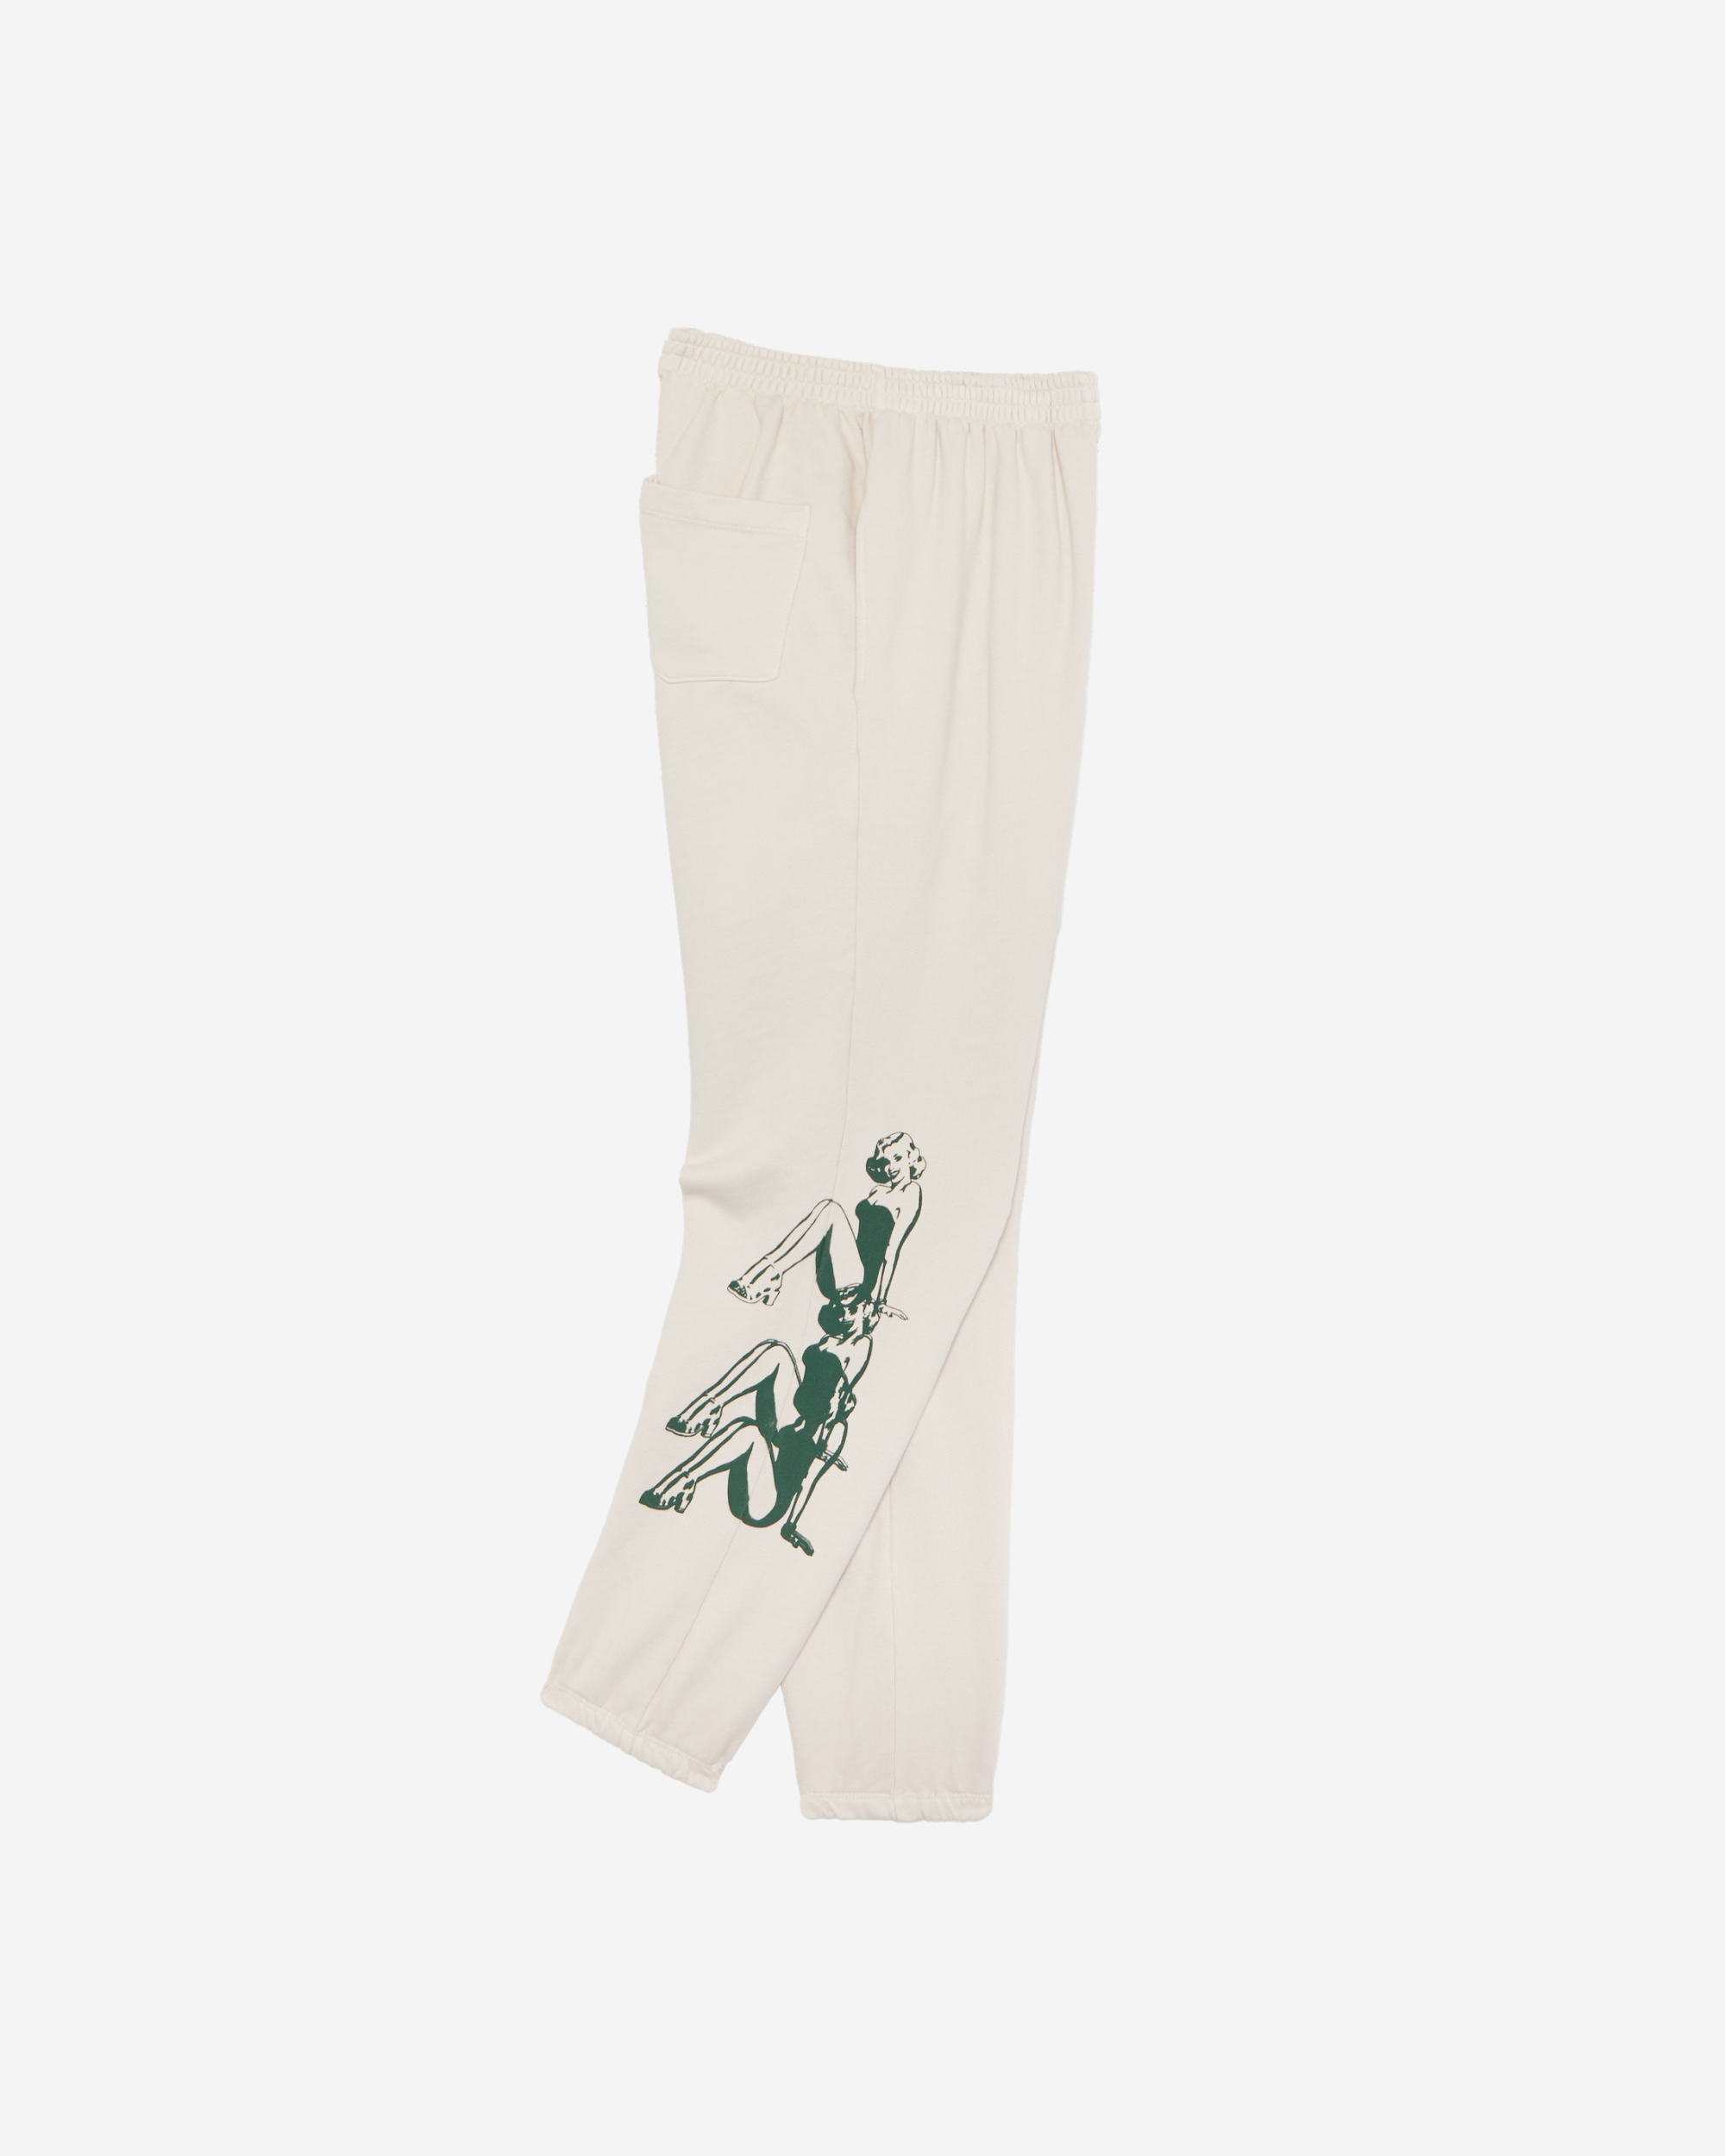 Connect Heavyweight Sweatpants - Brown